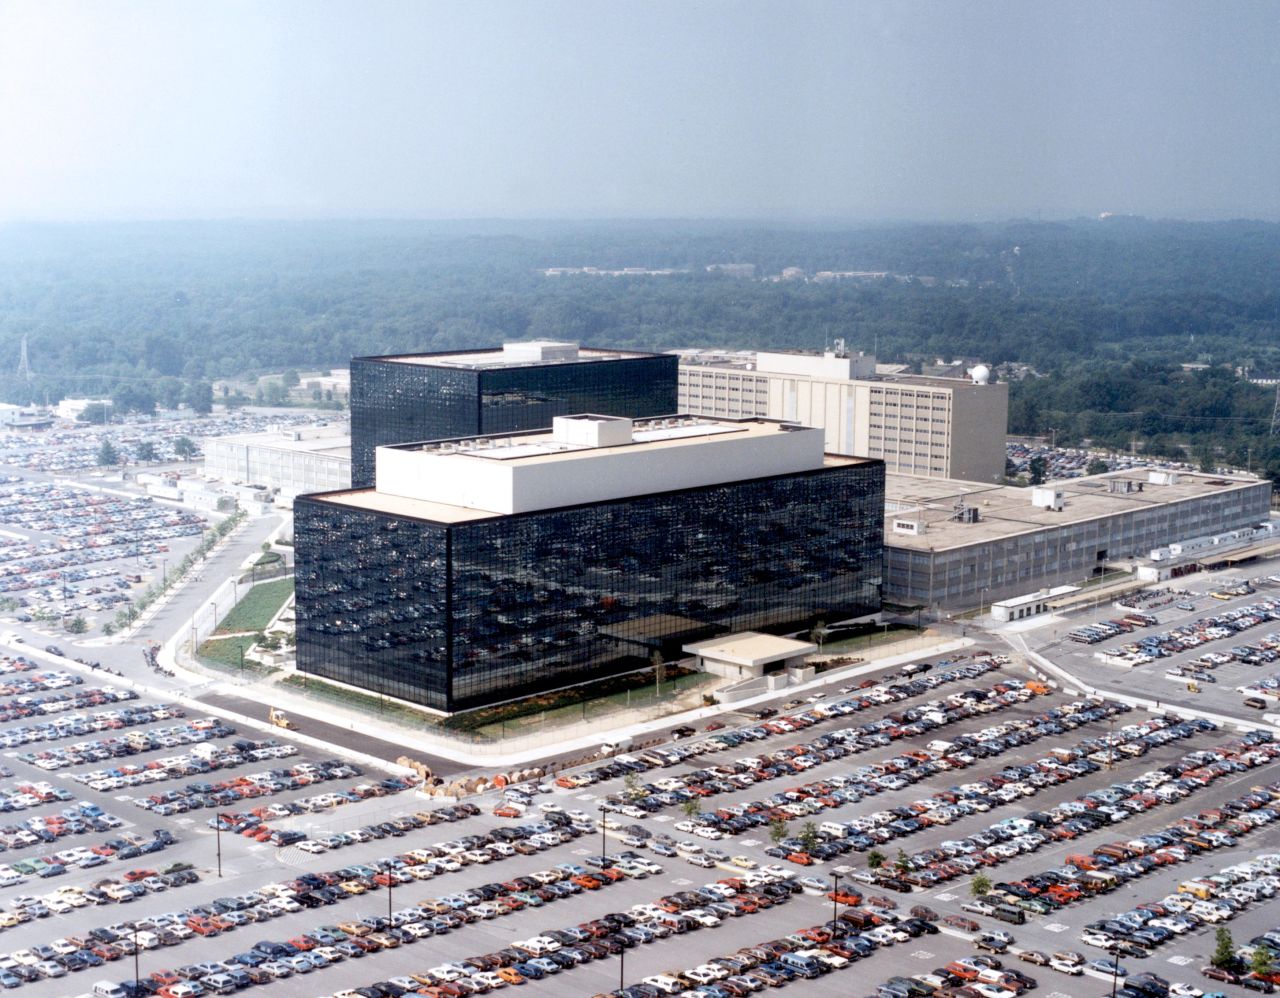 The need for such safeguards has been emphasized by the recent mass-surveillance scandals involving the U.S. National Security Agency (NSA).